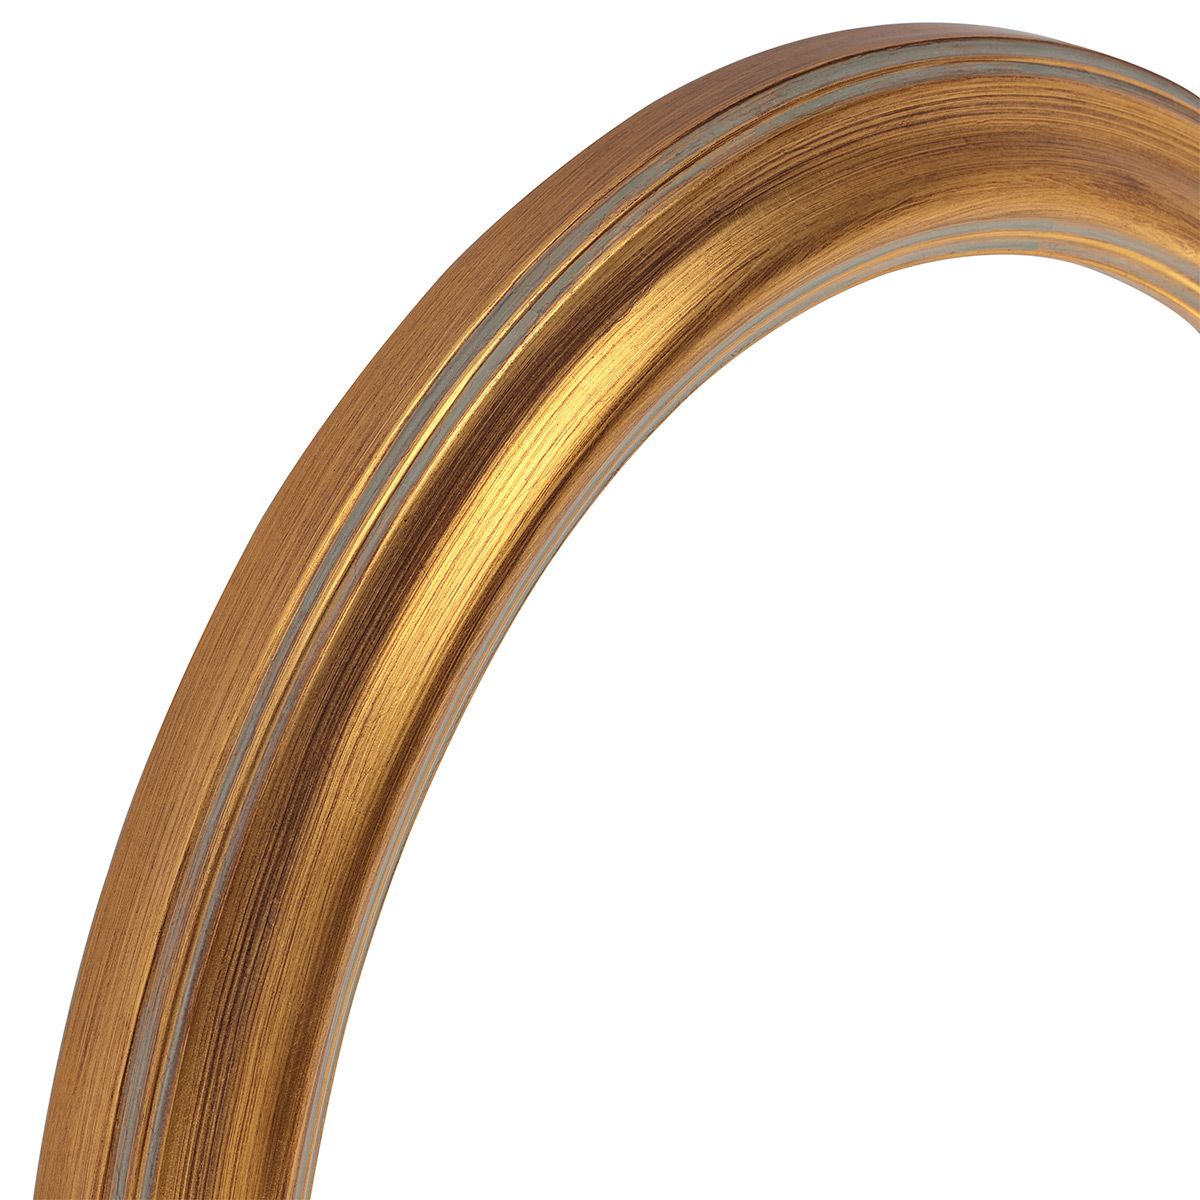 Ambiance Oval Frame - Gold, 20"x24"